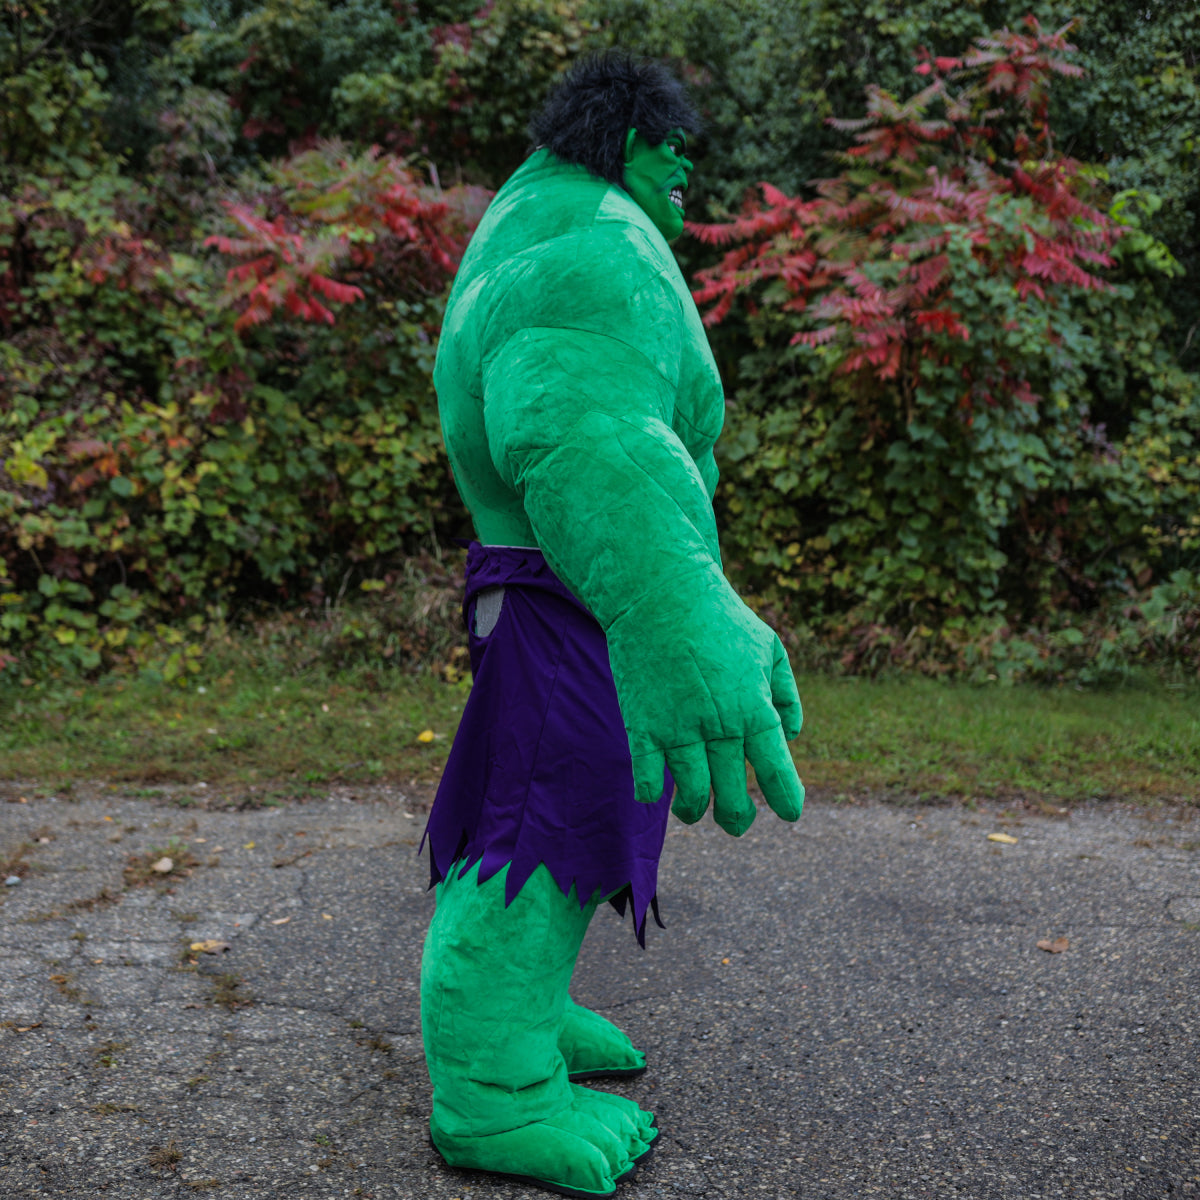 Giant Green Hulk Mascot Costume inflatable Halloween Cosplay Party